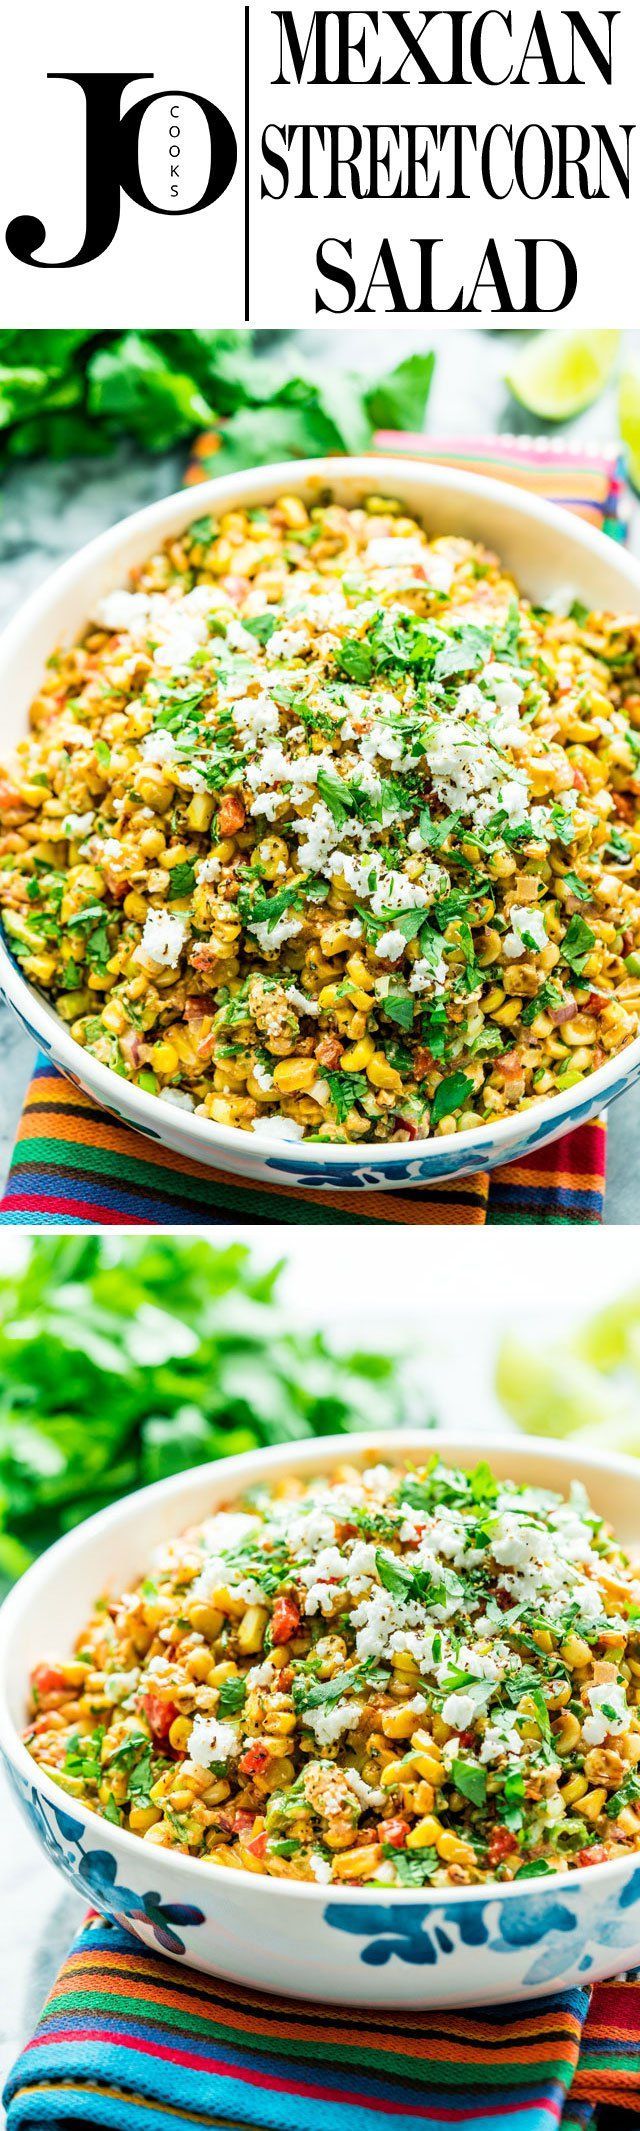 This Mexican street corn salad, also known as Esquites, is smoky, spicy, tangy and incredibly delicious. If you love the Mexican